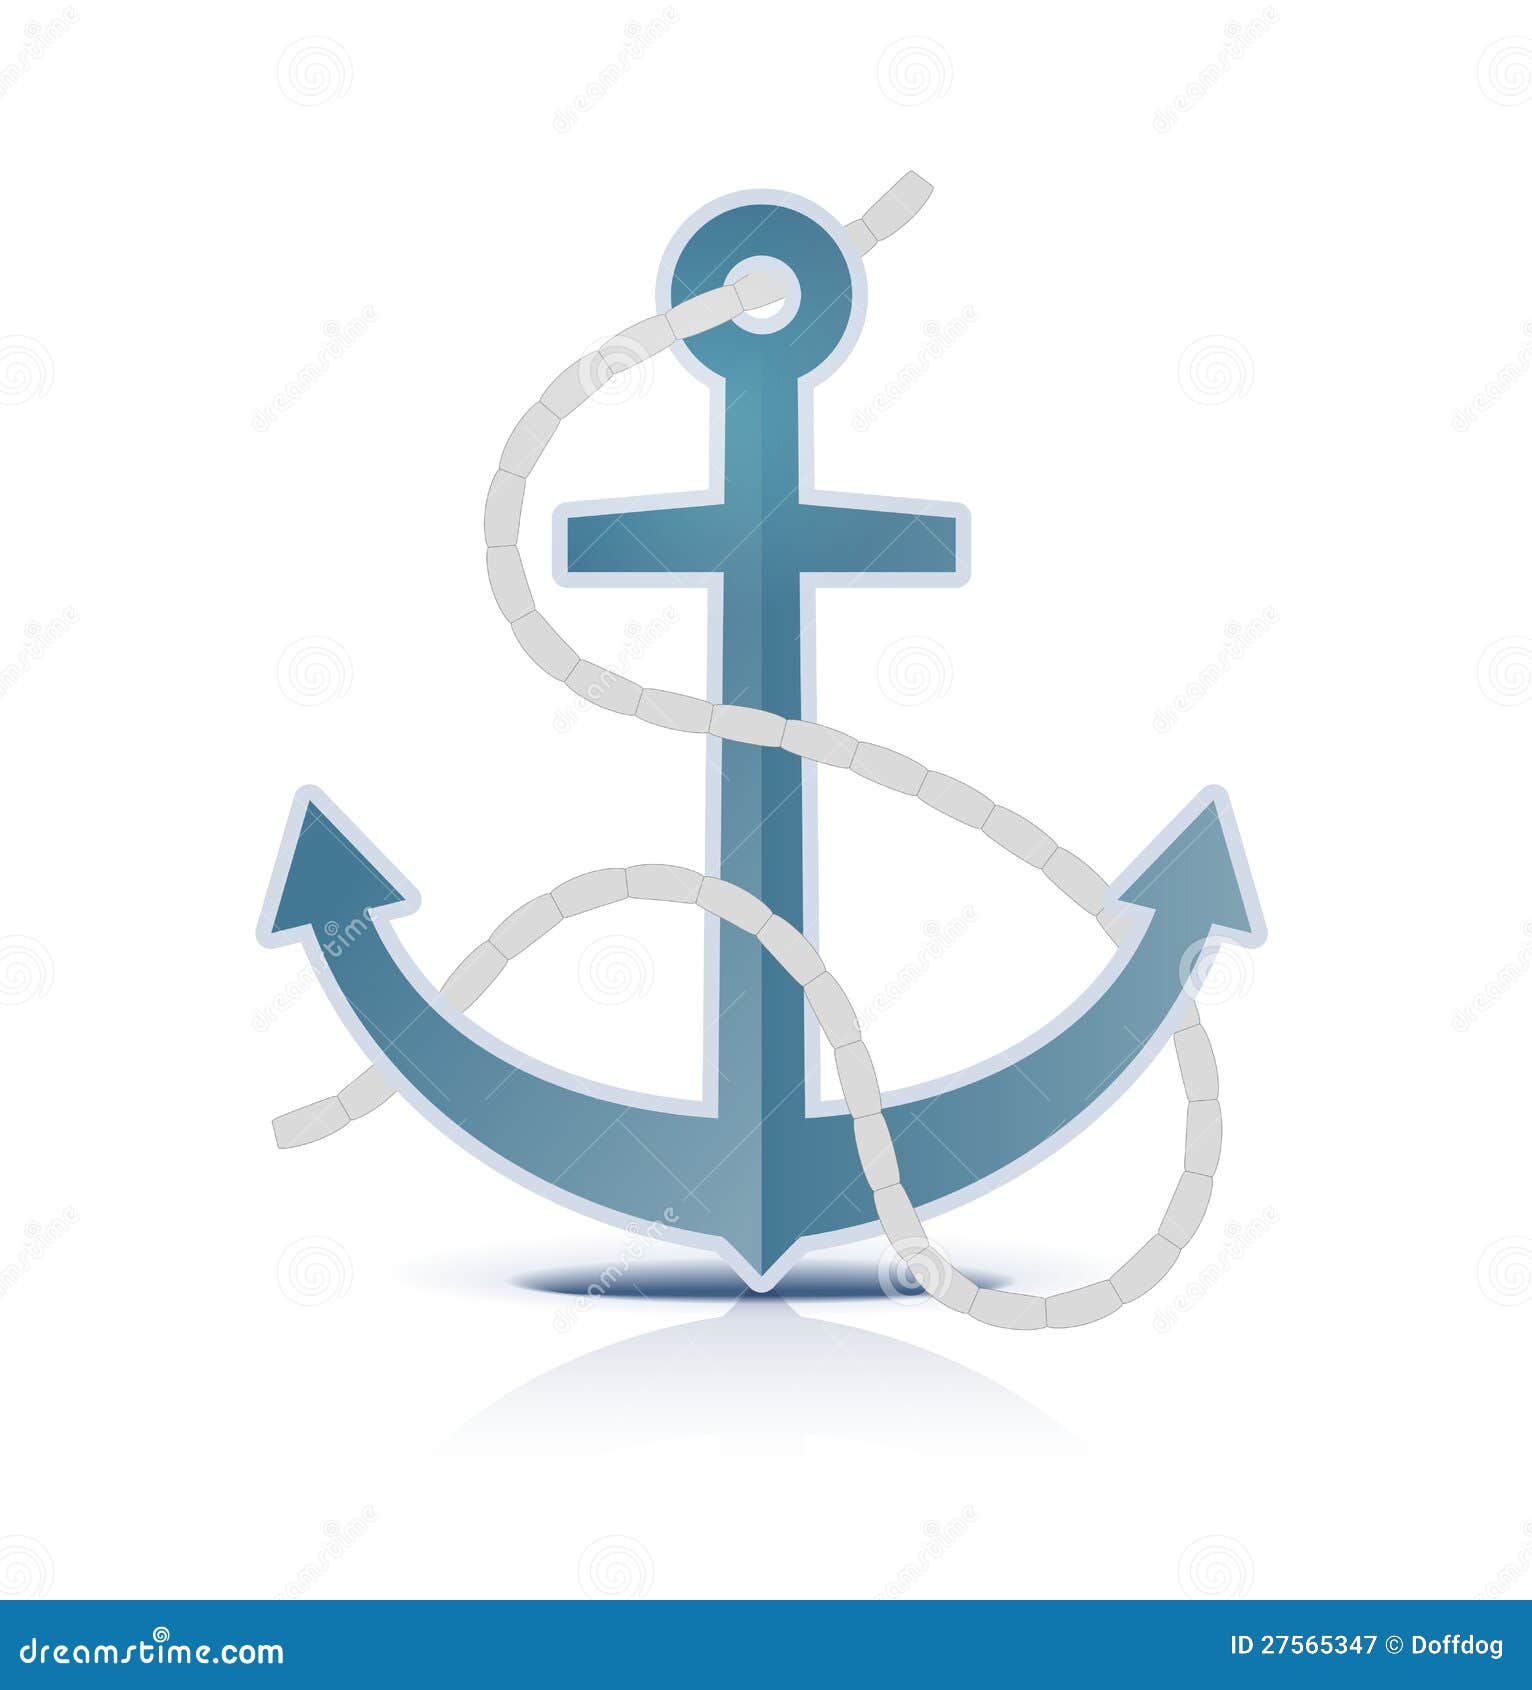 anchor clipart no background - photo #46